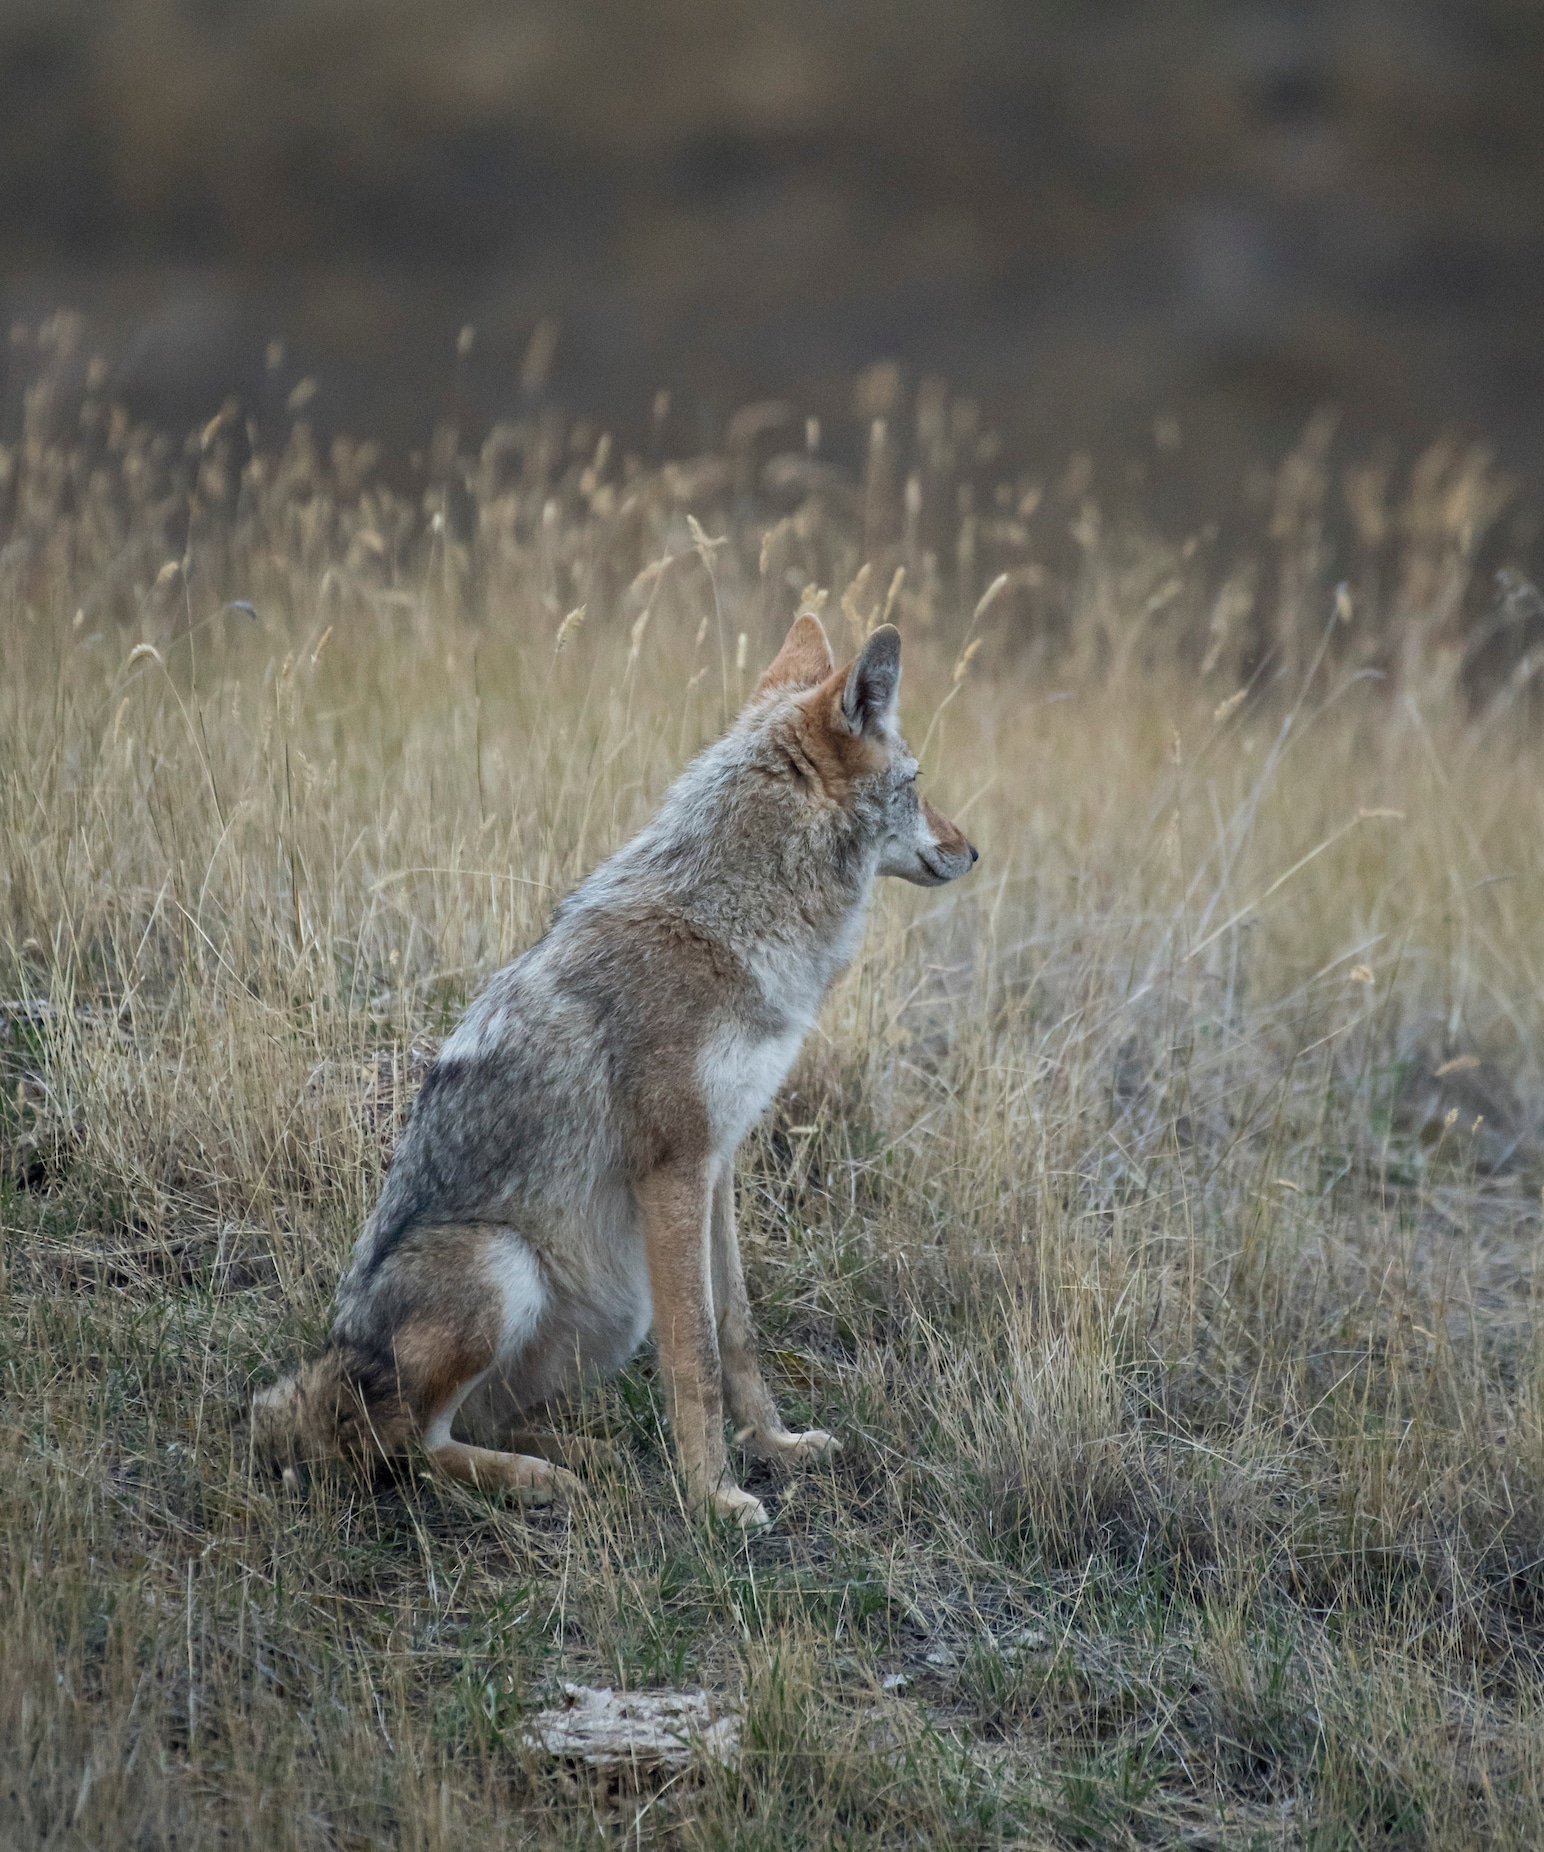 Sometimes, coyotes sit on the high ground and scan for the source of the calling sounds.